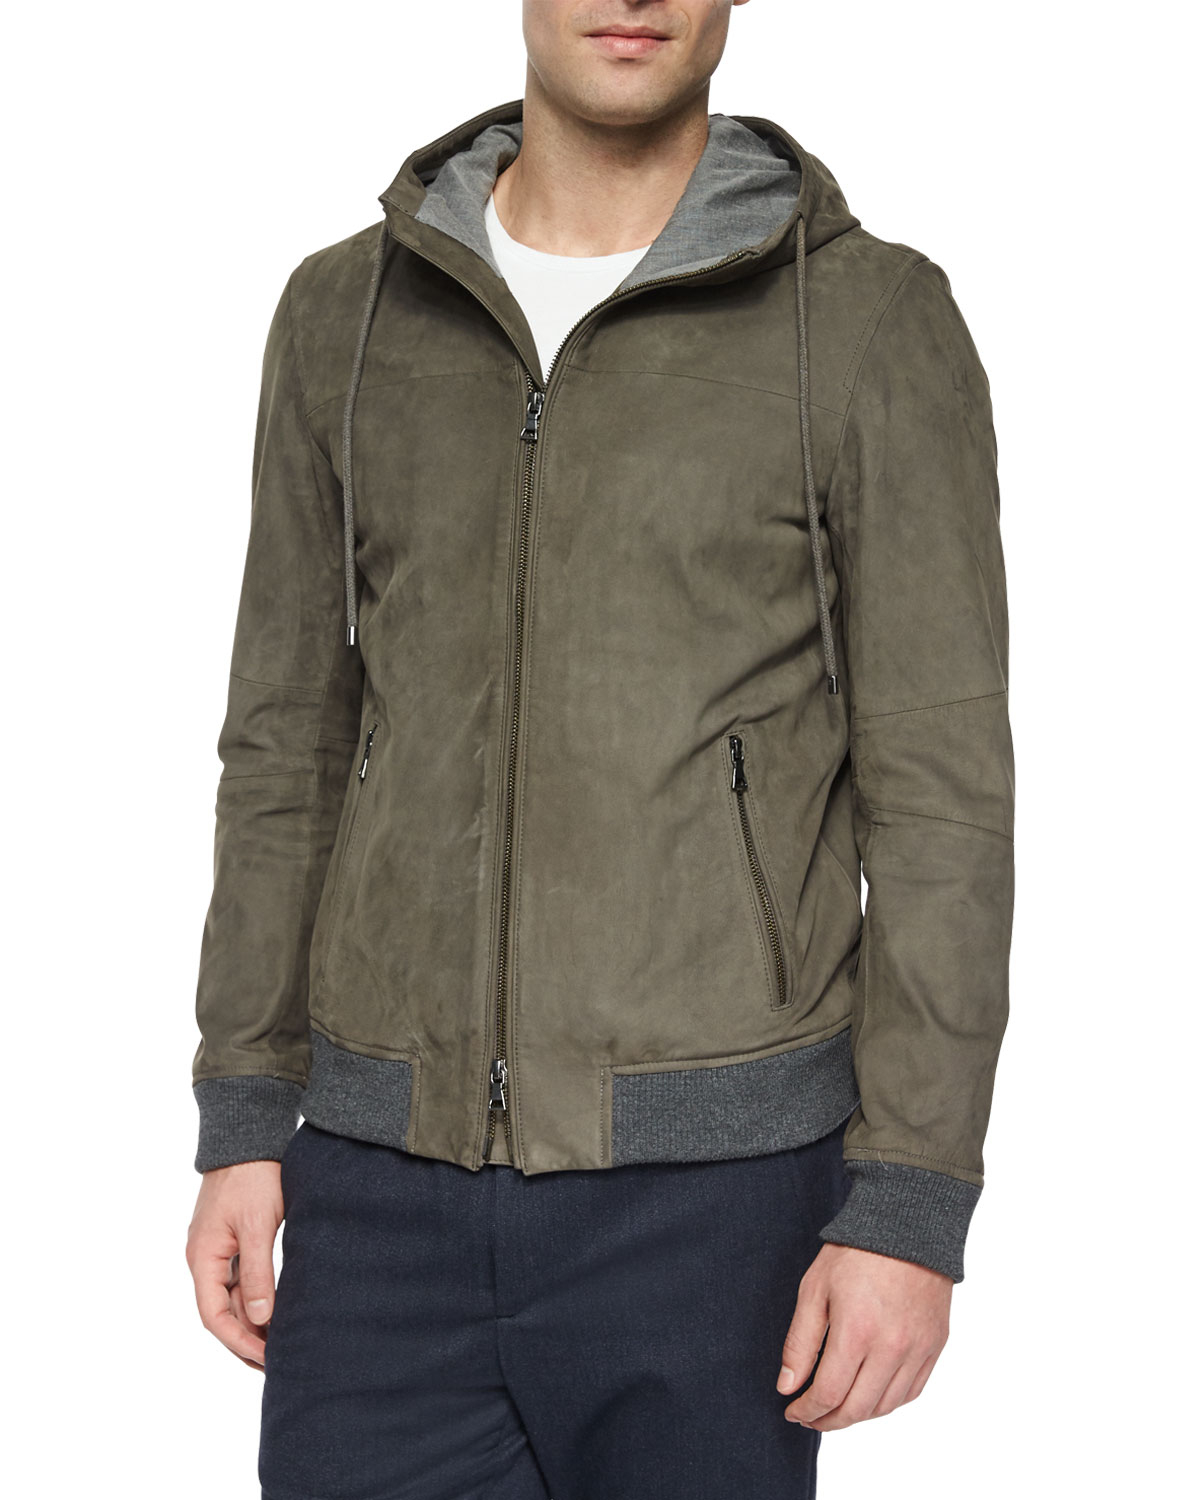 Lyst - Vince Nubuck Leather Hooded Jacket in Green for Men